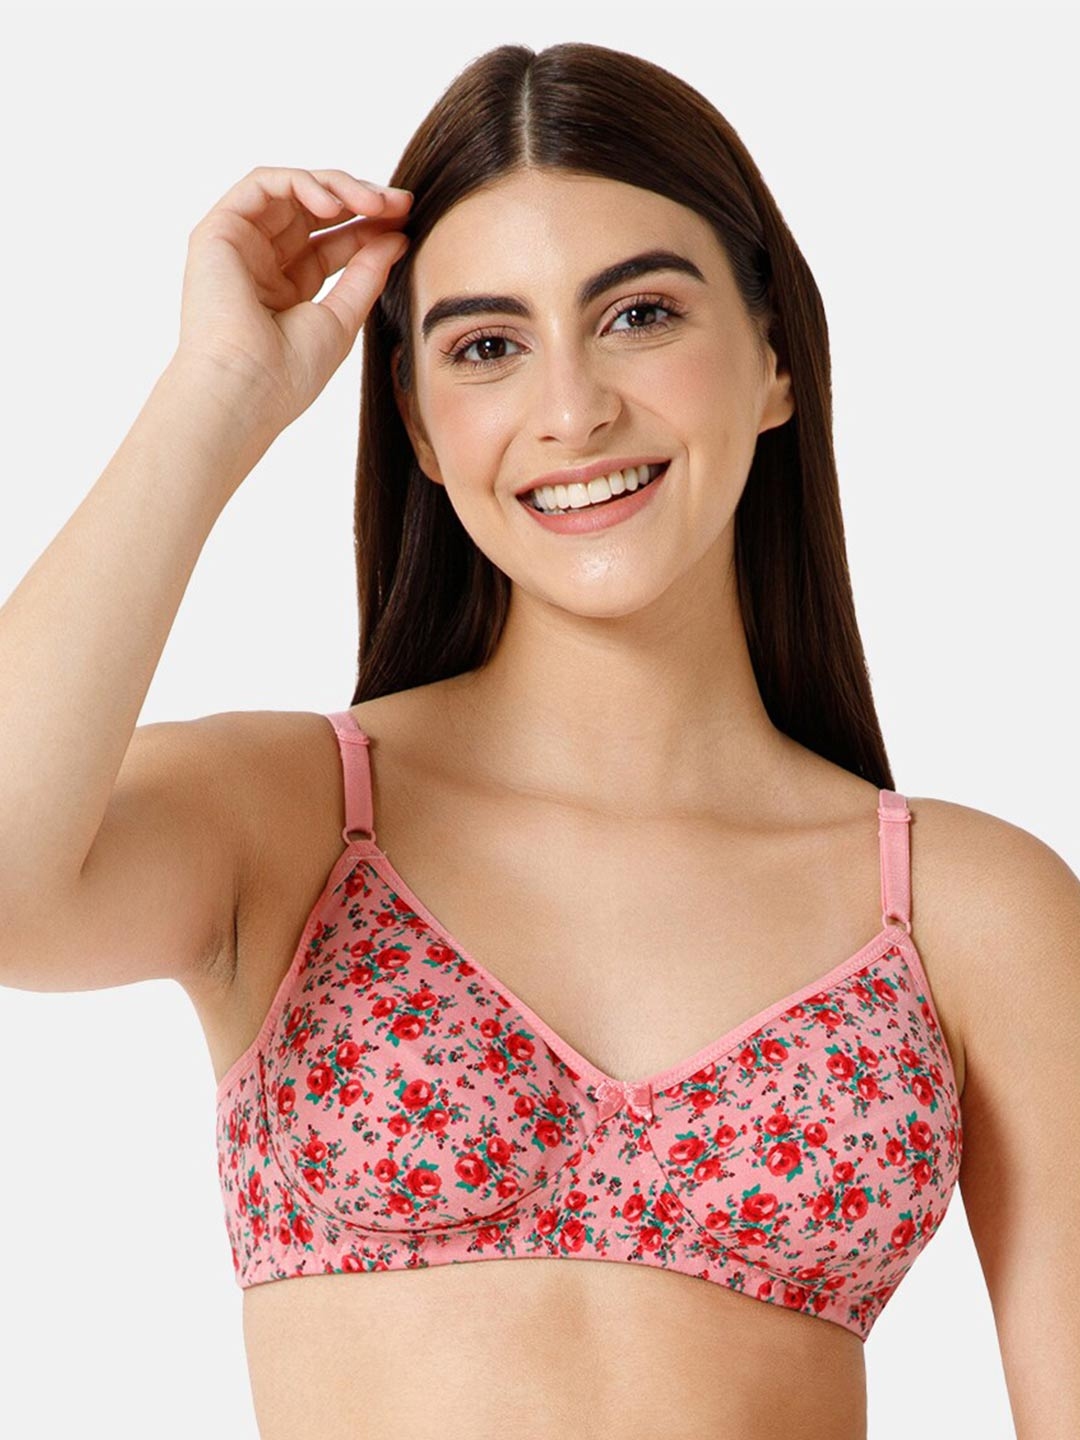 Buy Intimacy LINGERIE Floral Printed Full Coverage Everyday Cotton Bra With  Side Shaper - Bra for Women 26591296